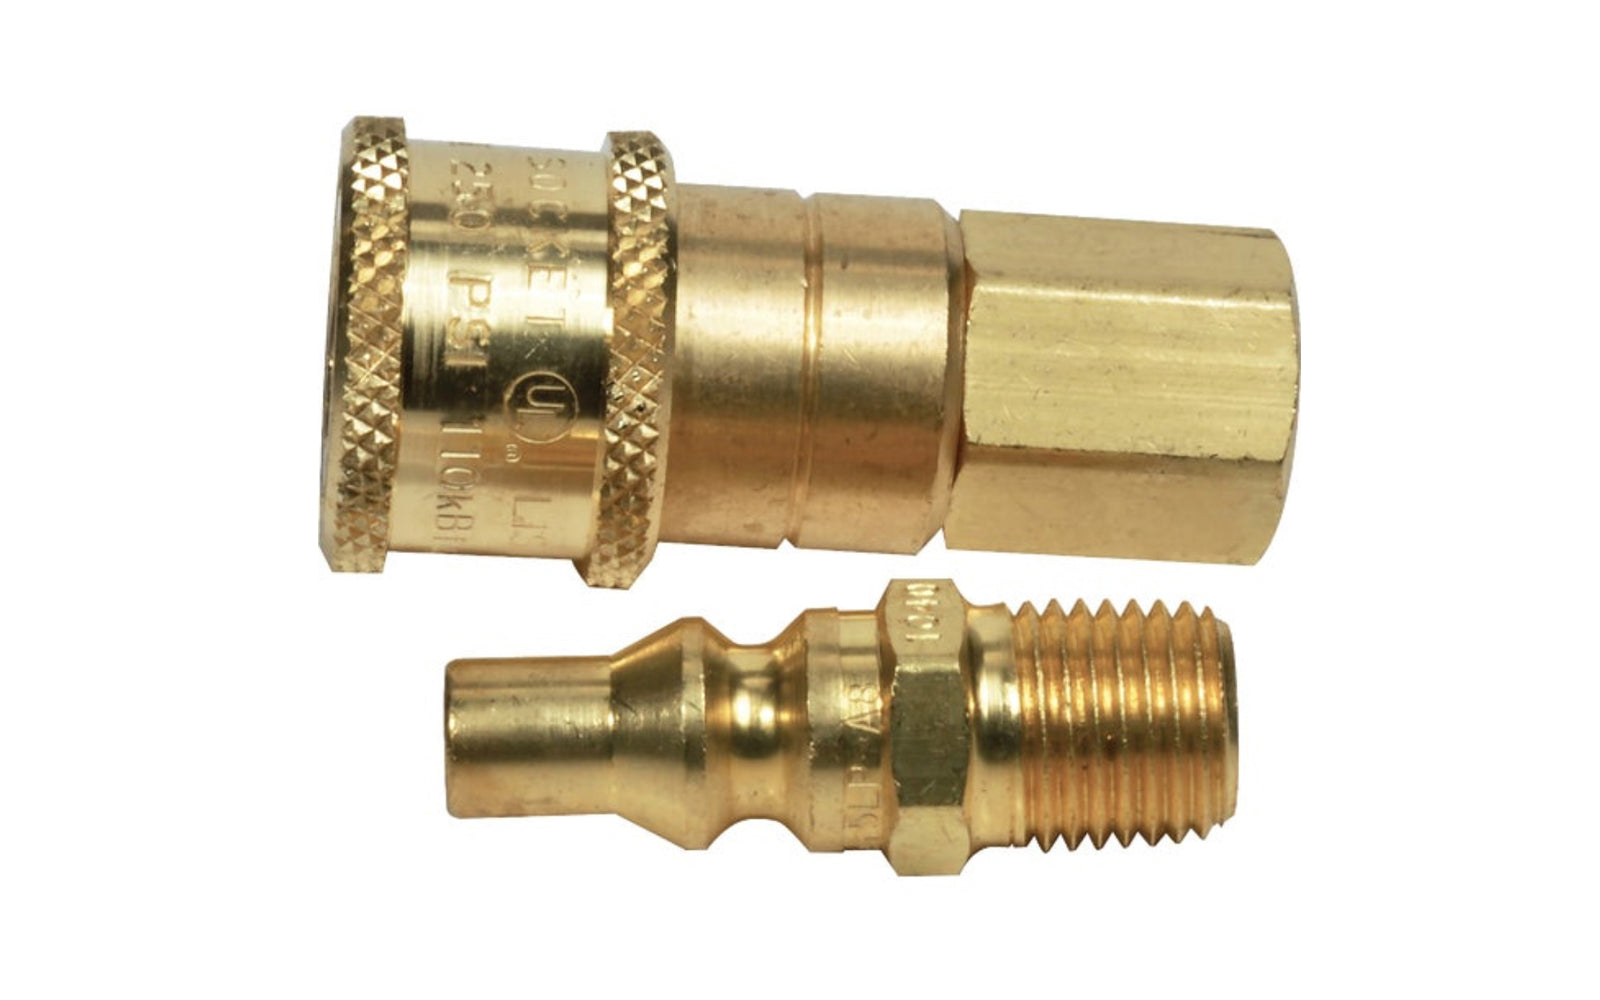 Mr Heater Propane/ Natural Gas Connector Kit. 1/4 In. Male pipe thread x 1/4 In Female pipe thread. All BTU capacities, automatic shutoff when plug is removed. CSA approved, UL listed. Used between (2) 5 Ft. hoses or between a 5 Ft. hose and regulator.